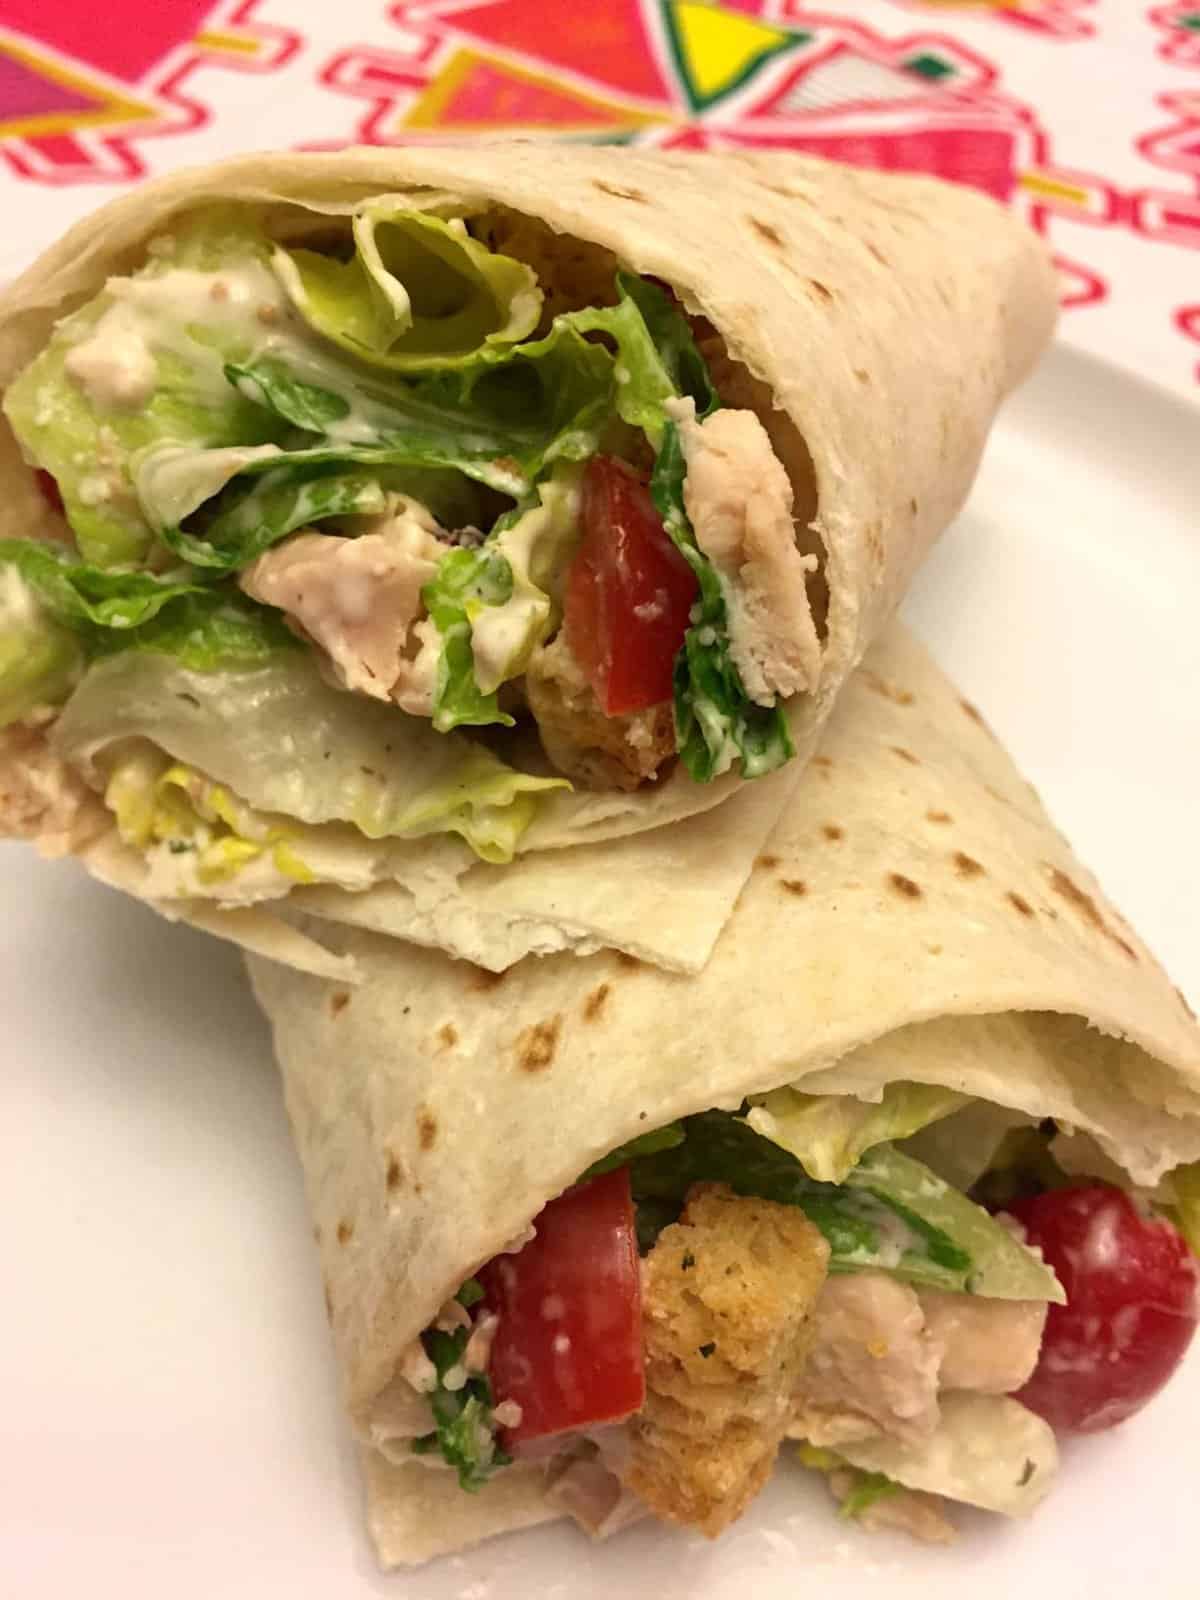 Two chicken Caesar wraps with lettuce, croutons, and tomatoes on a plate.